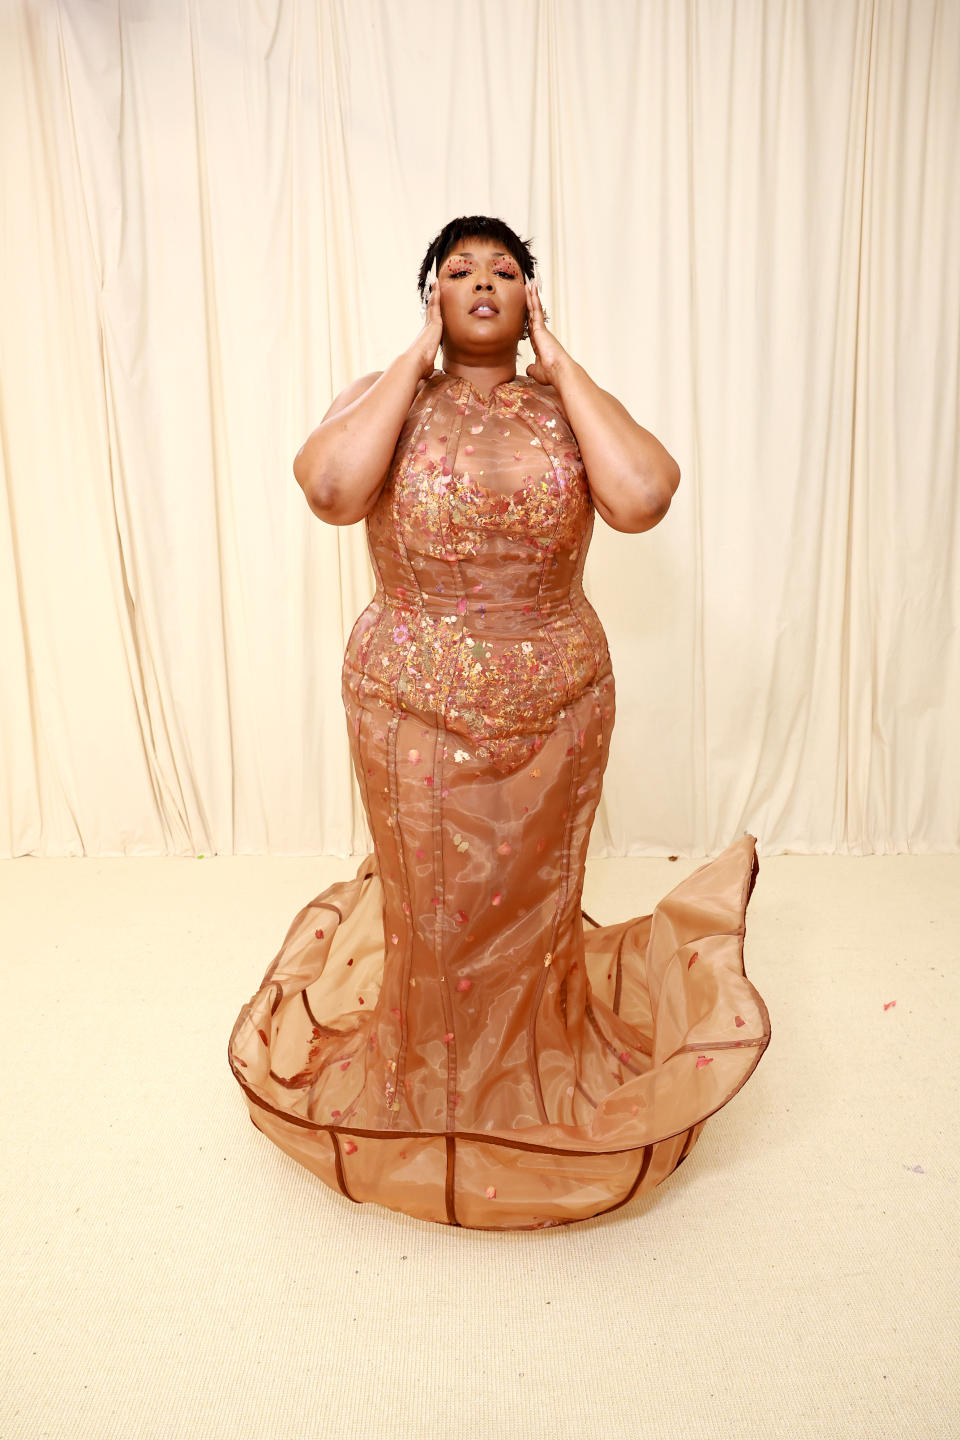 Lizzo in a floor-length, glittery gown with a trail, hands touching her hair, posing at an event